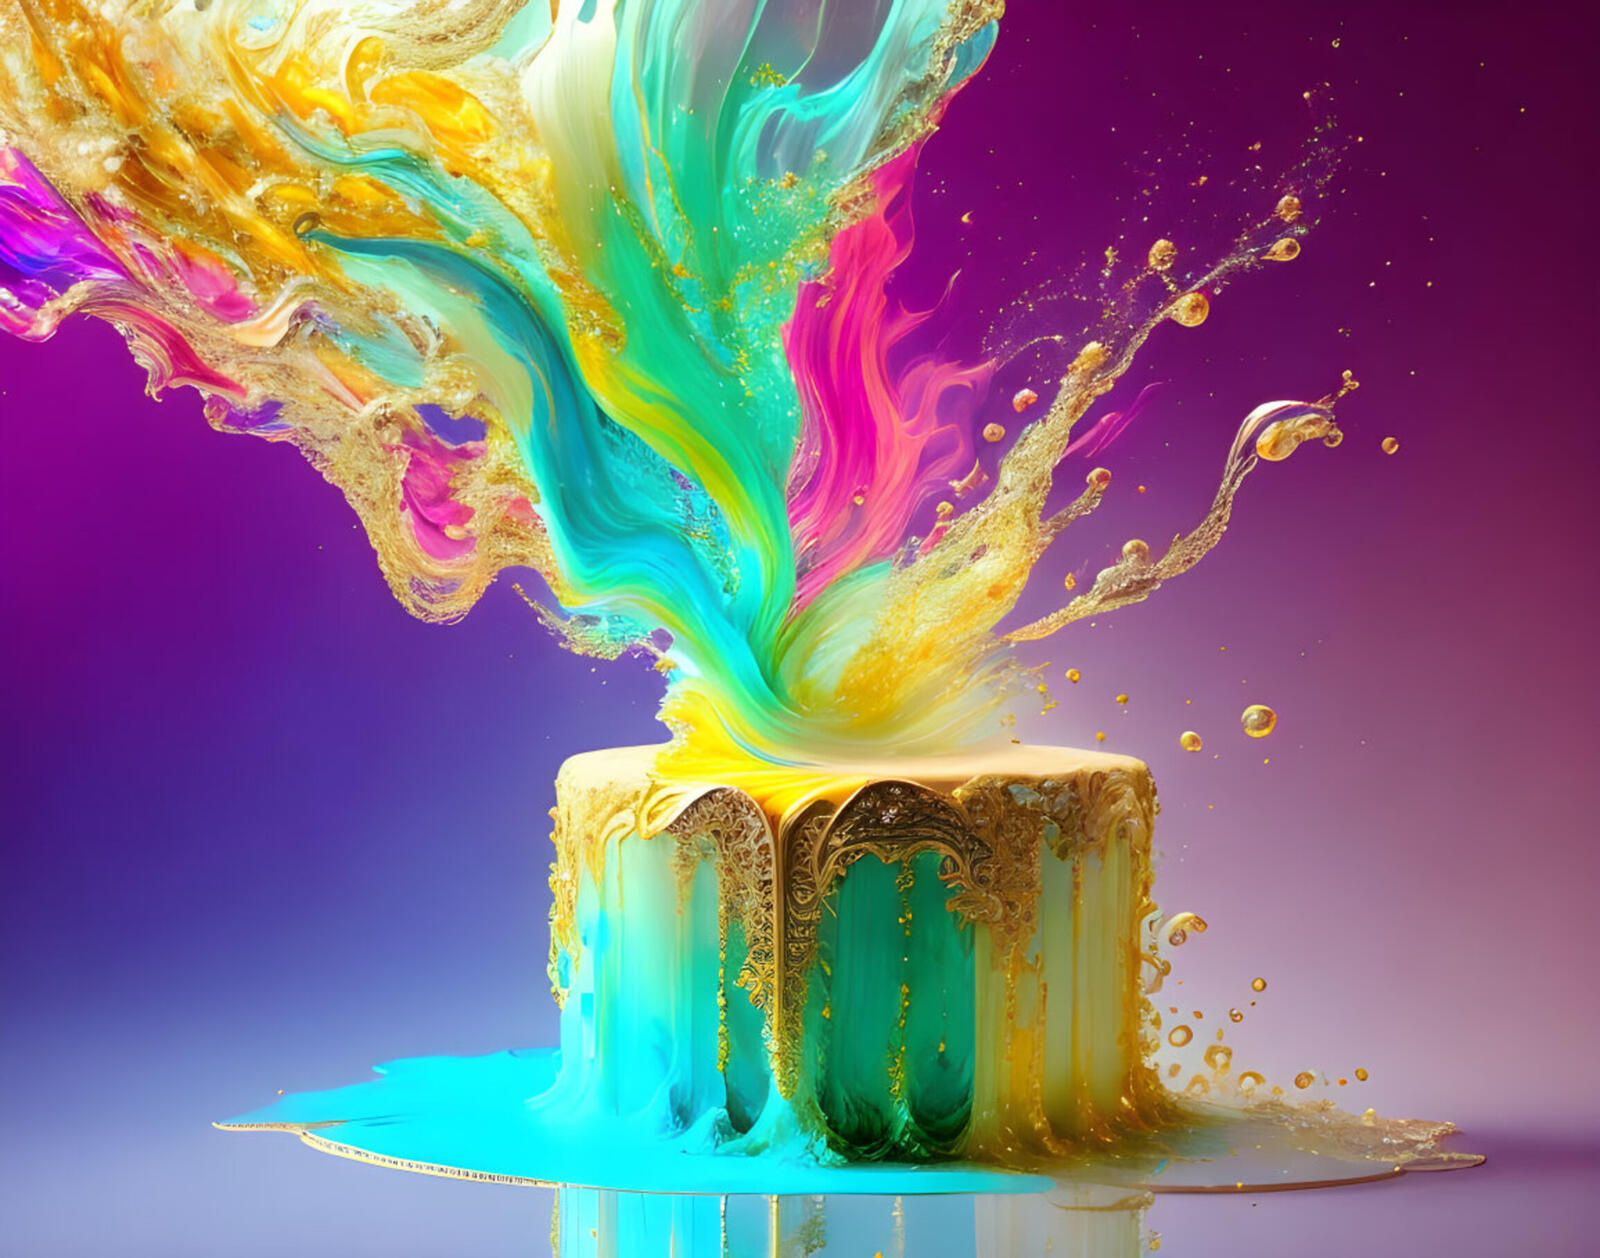 Free photo The explosion of a colorful cake